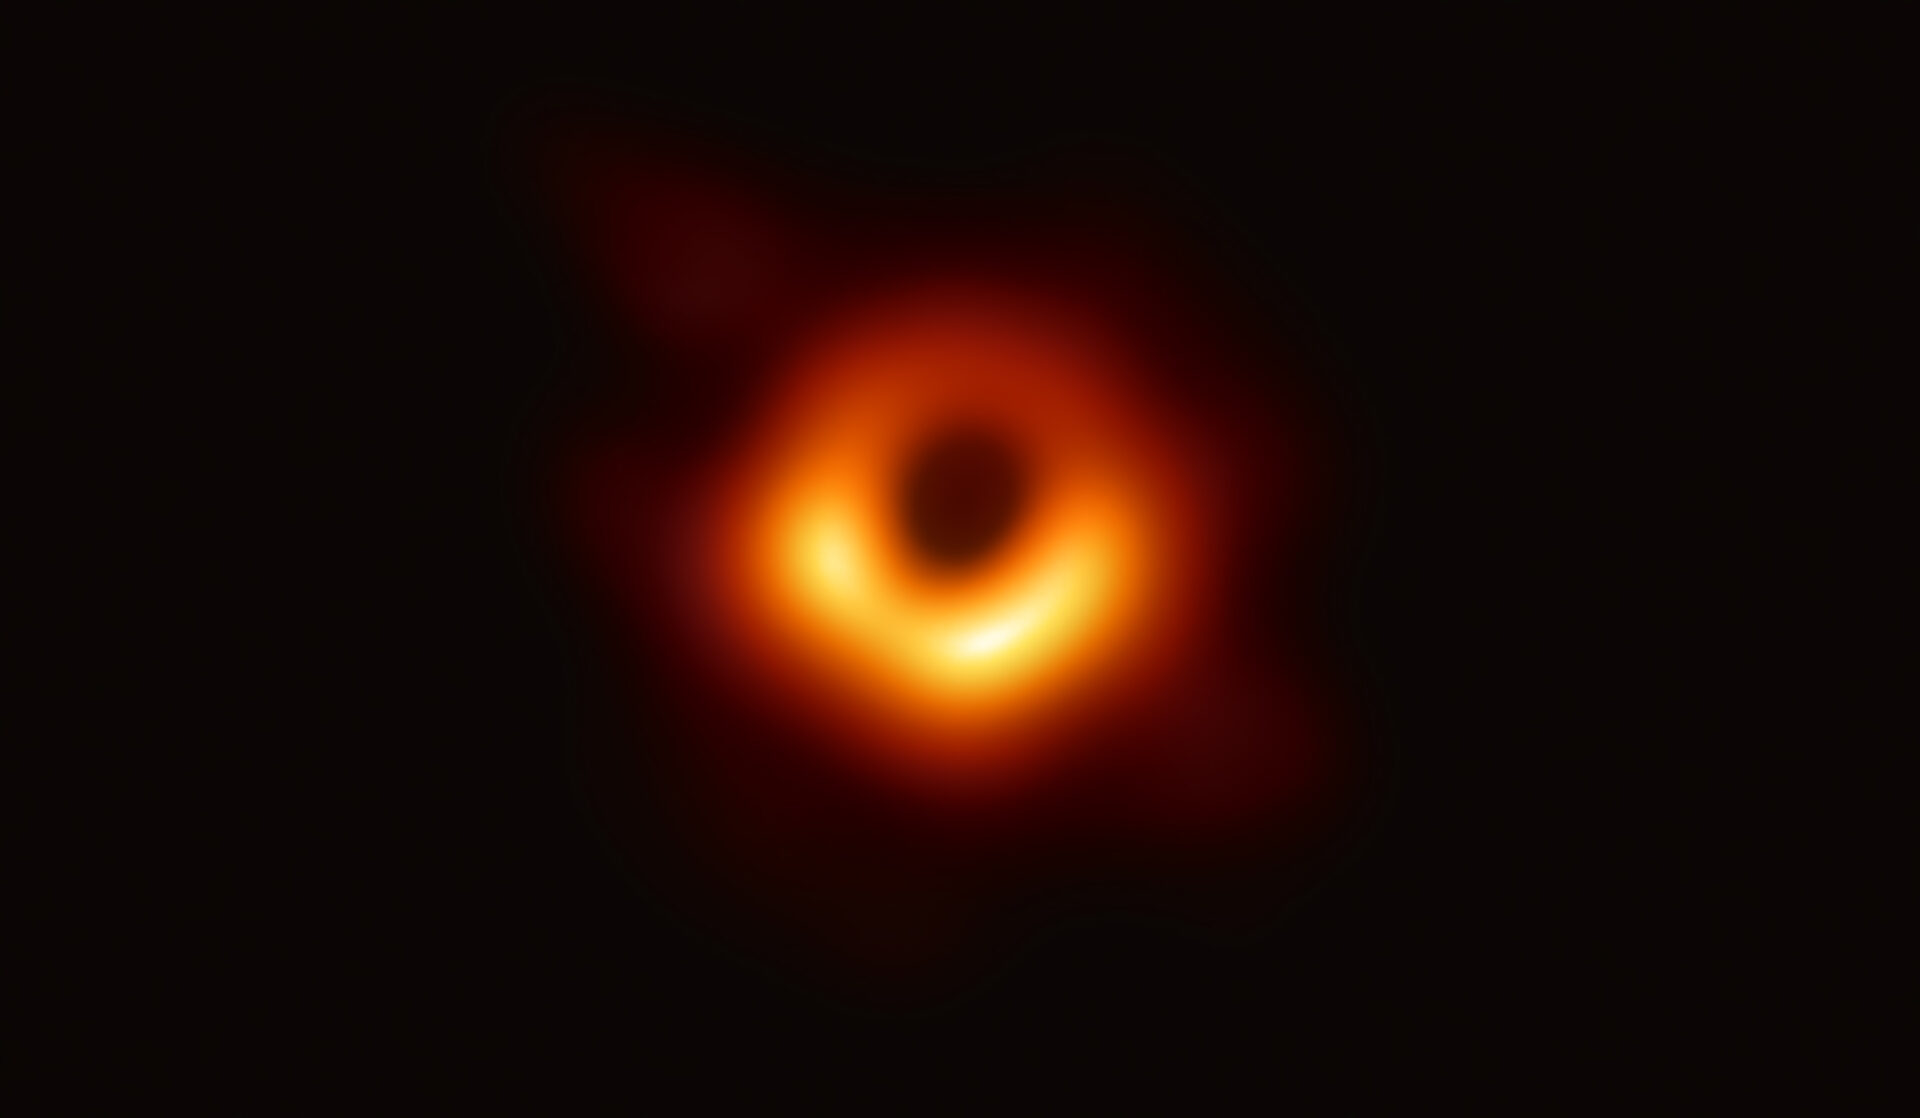 The Event Horizon Telescope (EHT) — a planet-scale array of eight ground-based radio telescopes forged through international collaboration — was designed to capture images of a black hole. In coordinated press conferences across the globe, EHT researchers revealed that they succeeded, unveiling the first direct visual evidence of the supermassive black hole in the center of Messier 87 and its shadow. The shadow of a black hole seen here is the closest we can come to an image of the black hole itself, a completely dark object from which light cannot escape. The black hole’s boundary — the event horizon from which the EHT takes its name — is around 2.5 times smaller than the shadow it casts and measures just under 40 billion km across. While this may sound large, this ring is only about 40 microarcseconds across — equivalent to measuring the length of a credit card on the surface of the Moon. Although the telescopes making up the EHT are not physically connected, they are able to synchronize their recorded data with atomic clocks — hydrogen masers — which precisely time their observations. These observations were collected at a wavelength of 1.3 mm during a 2017 global campaign. Each telescope of the EHT produced enormous amounts of data – roughly 350 terabytes per day – which was stored on high-performance helium-filled hard drives. These data were flown to highly specialized supercomputers — known as correlators — at the Max Planck Institute for Radio Astronomy and MIT Haystack Observatory to be combined. They were then painstakingly converted into an image using novel computational tools developed by the collaboration. Credit: EHT Collaboration